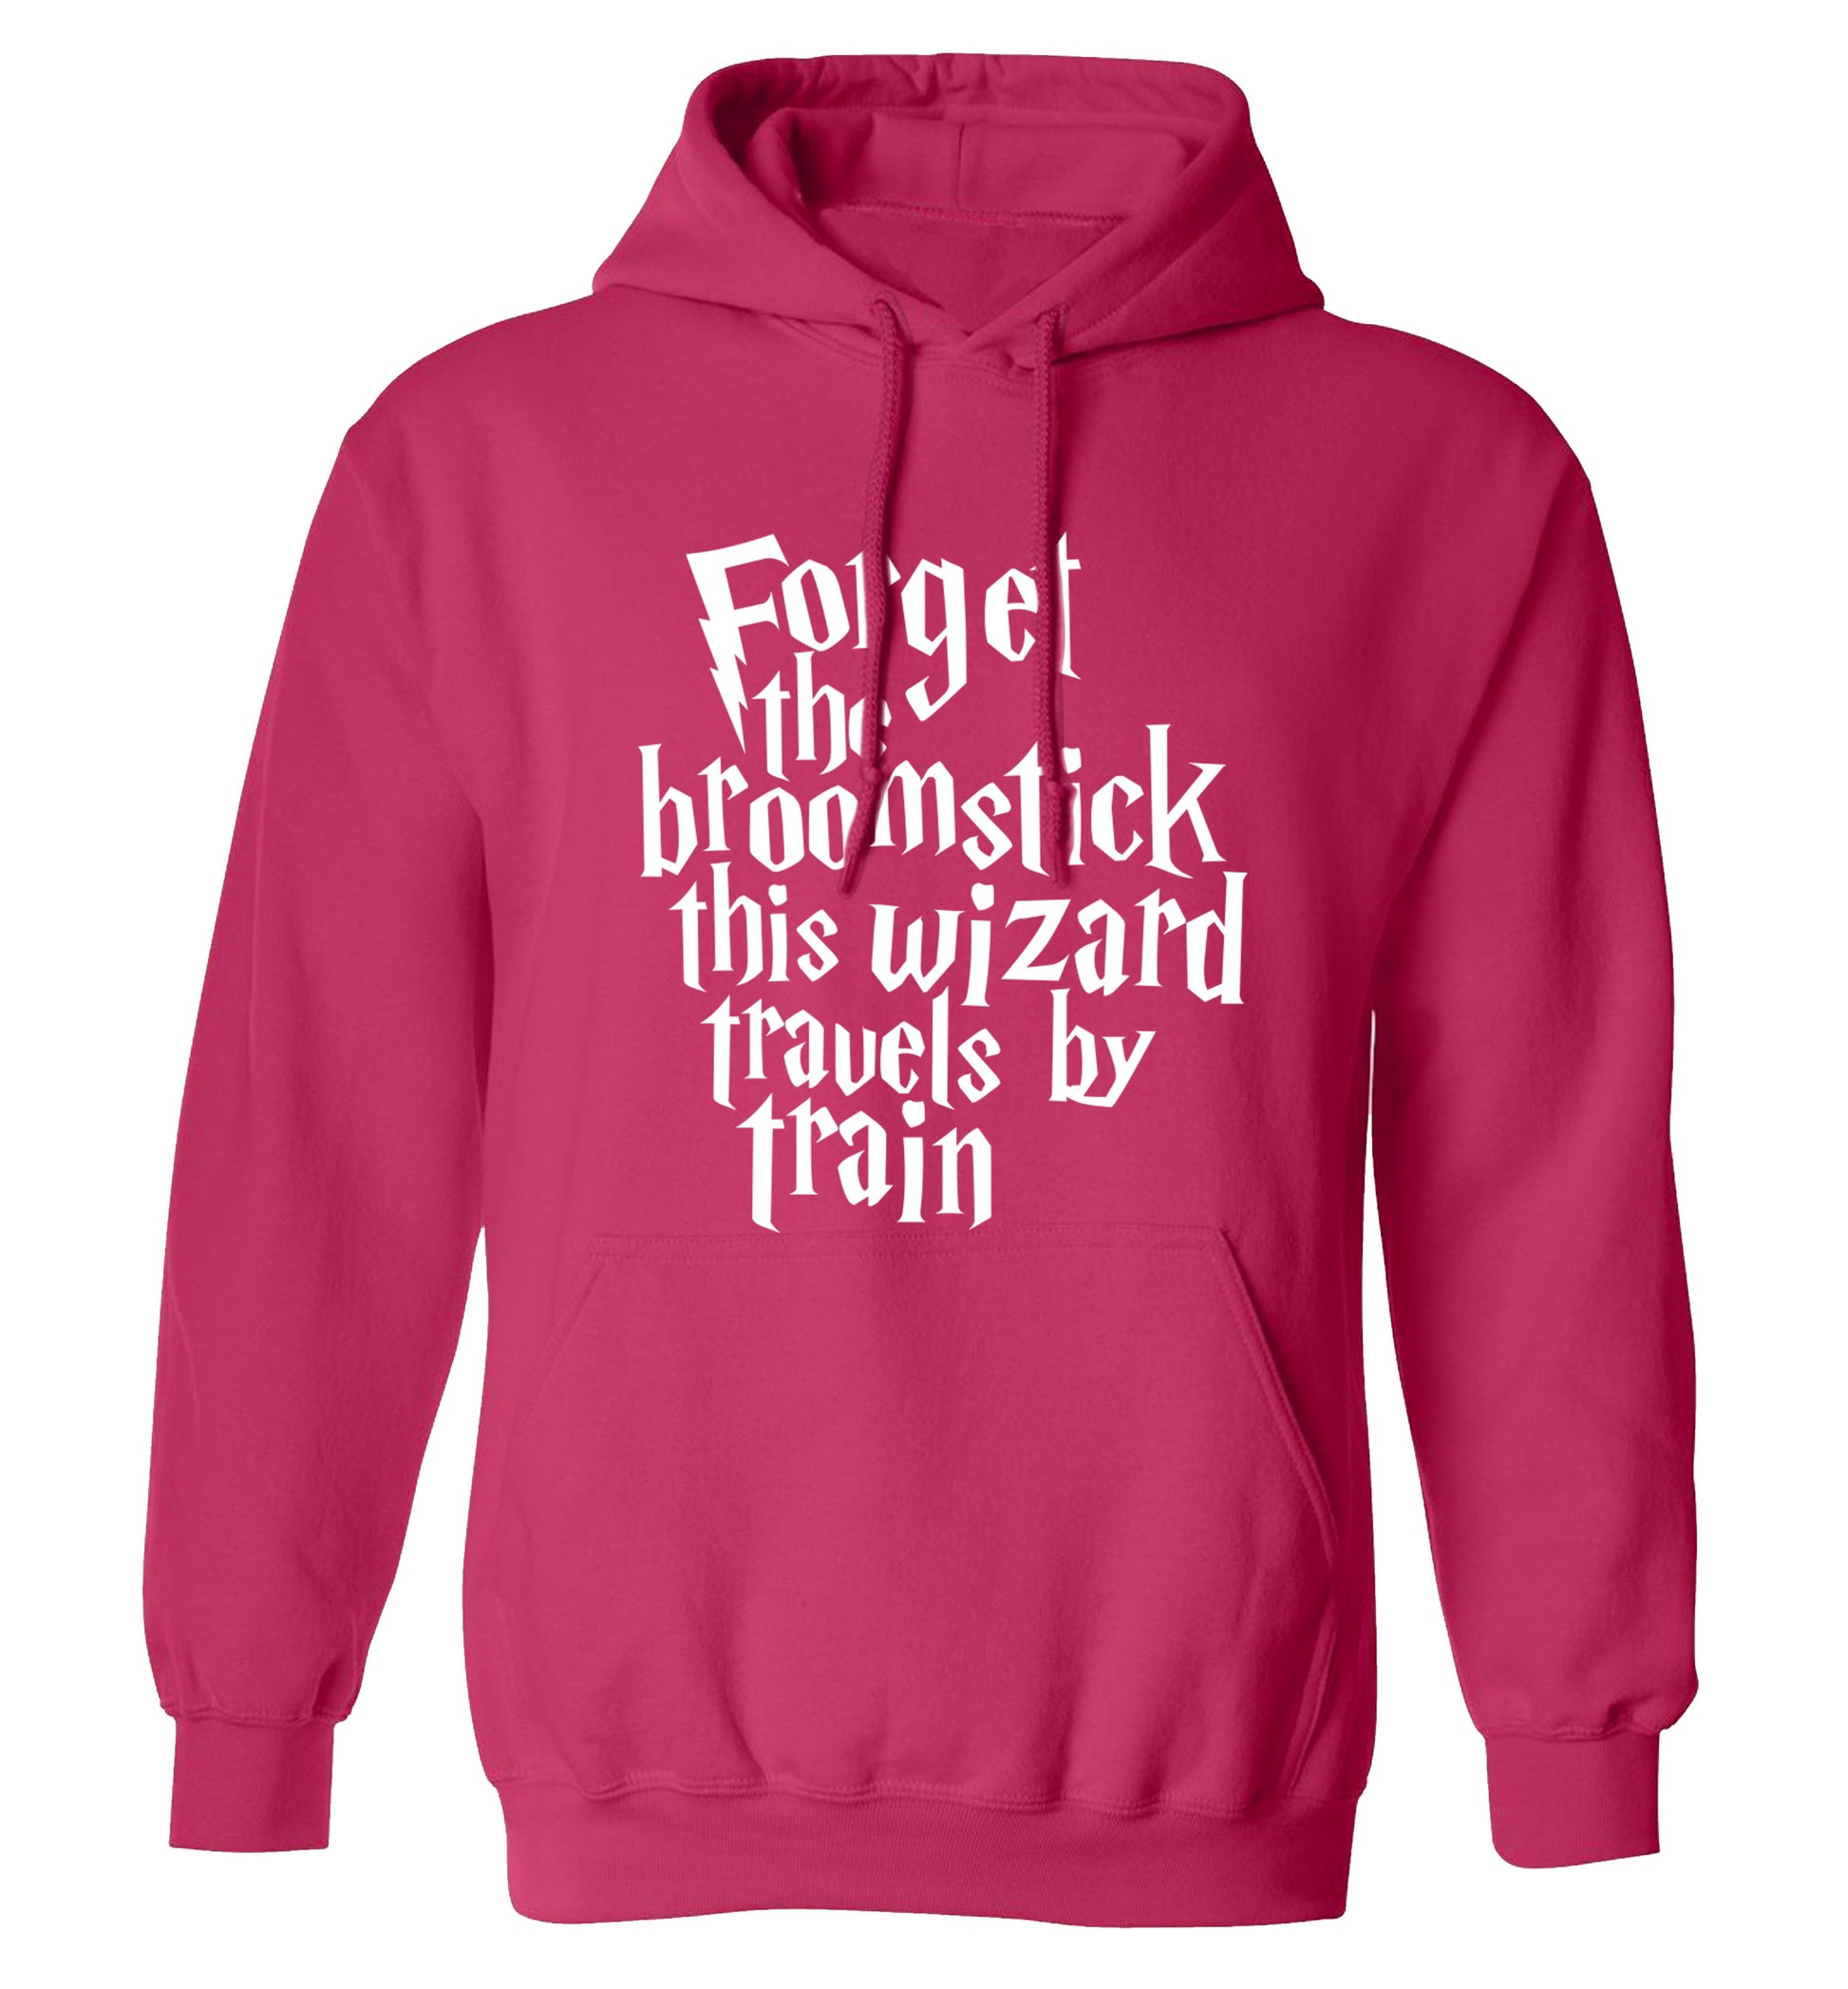 Forget the broomstick this wizard travels by train adults unisexpink hoodie 2XL